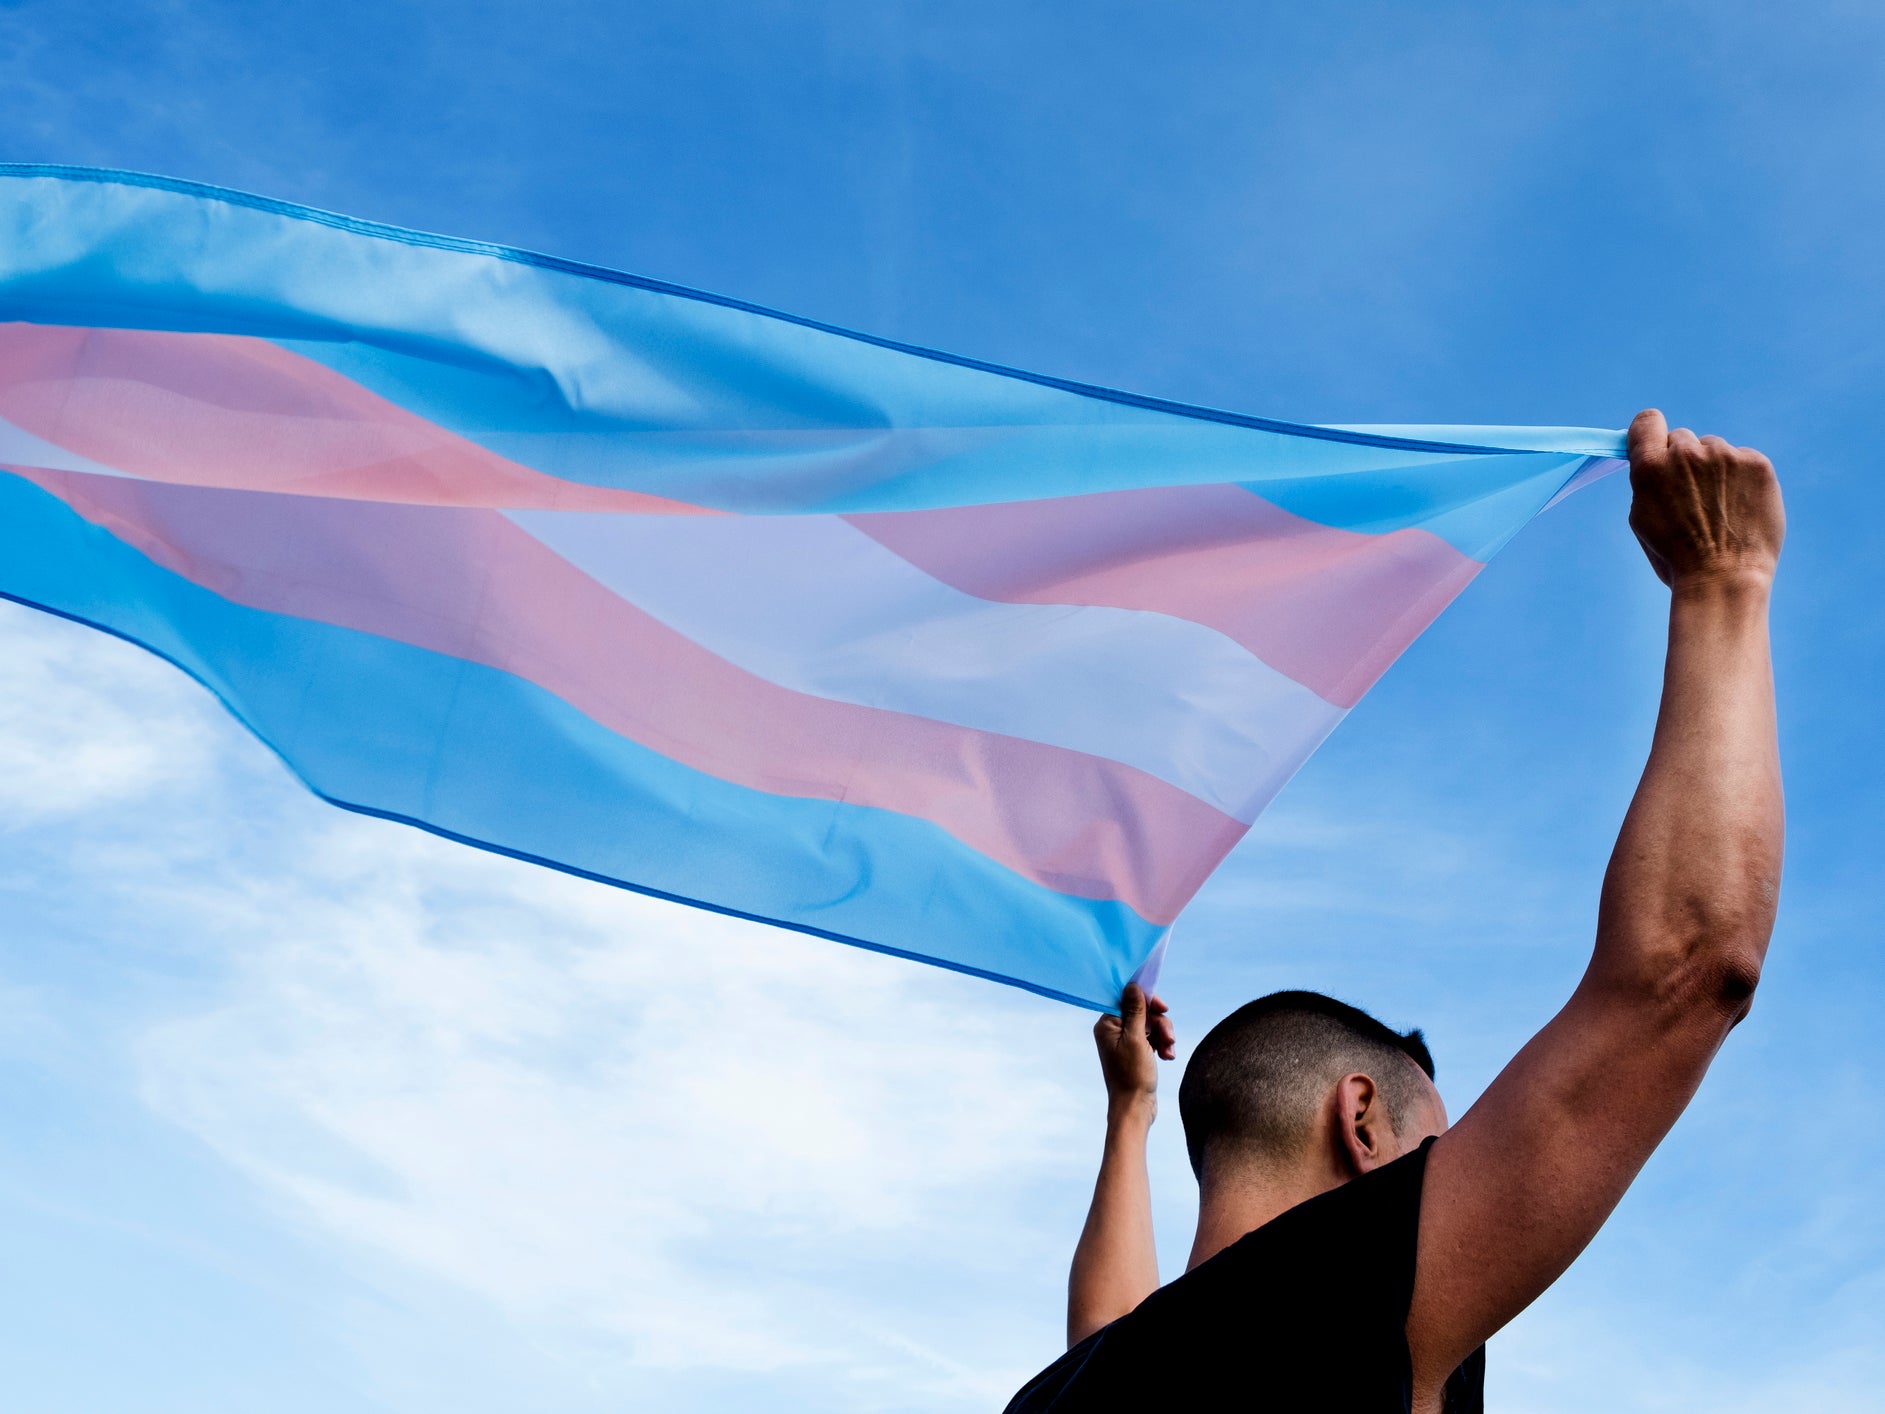 US District Court Judge Frederic Block cited the Supreme Court’s ruling in June on job discrimination while imposing a preliminary injunction on a new HHS rule that would roll back protections for transgender patients across the country.